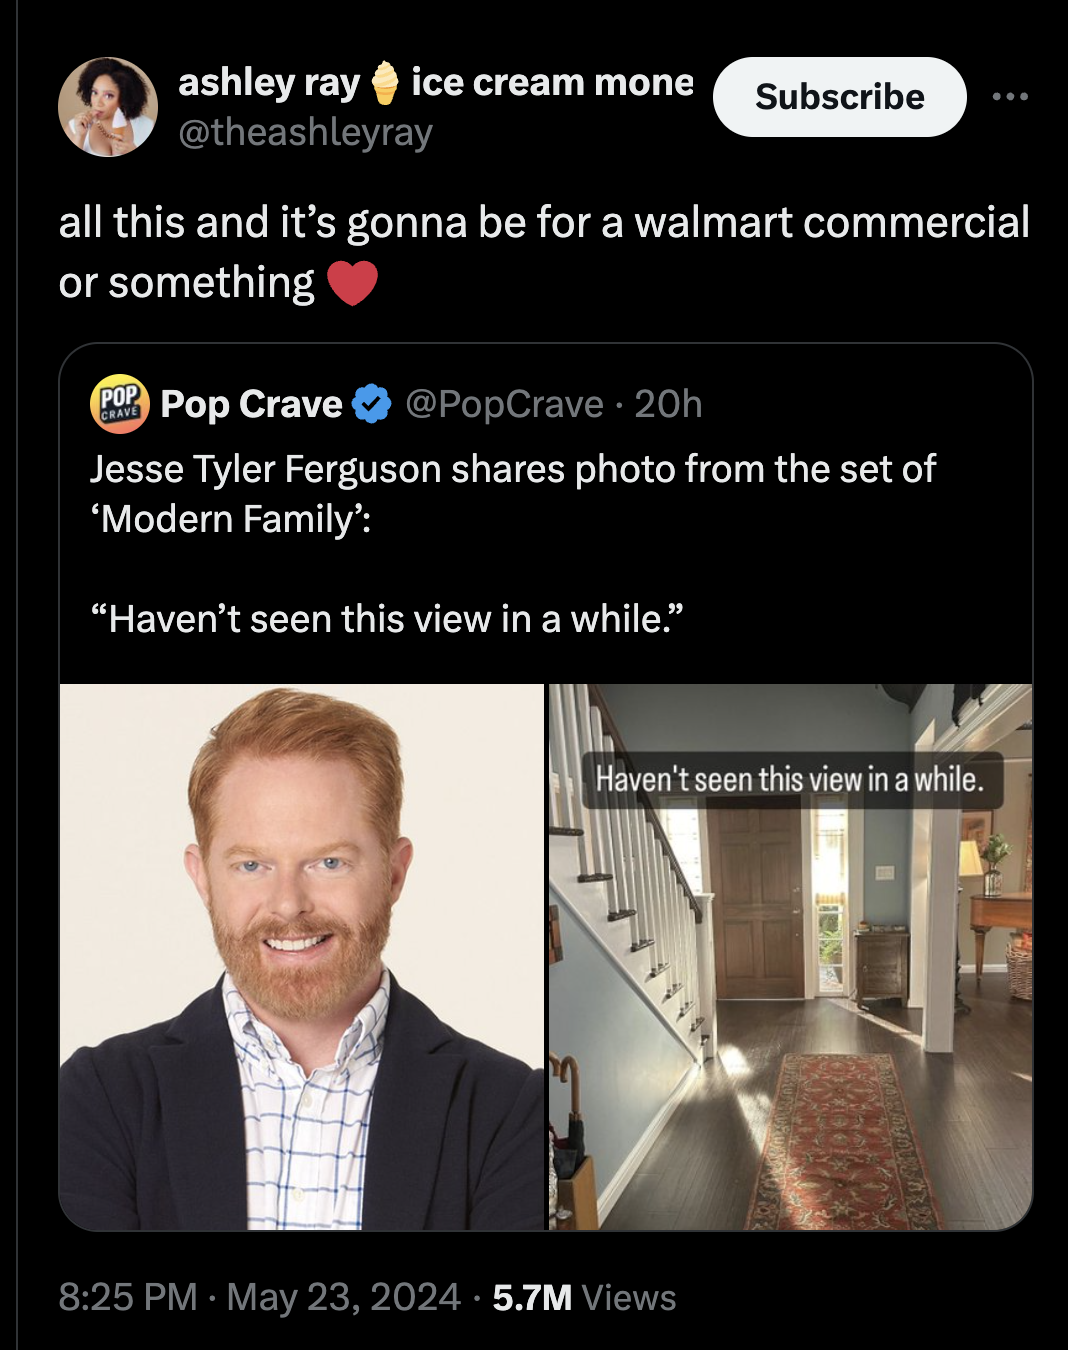 screenshot - ashley ray ice cream mone Subscribe all this and it's gonna be for a walmart commercial or something Pop Crave 20h Jesse Tyler Ferguson photo from the set of 'Modern Family' "Haven't seen this view in a while." Haven't seen this view in a whi